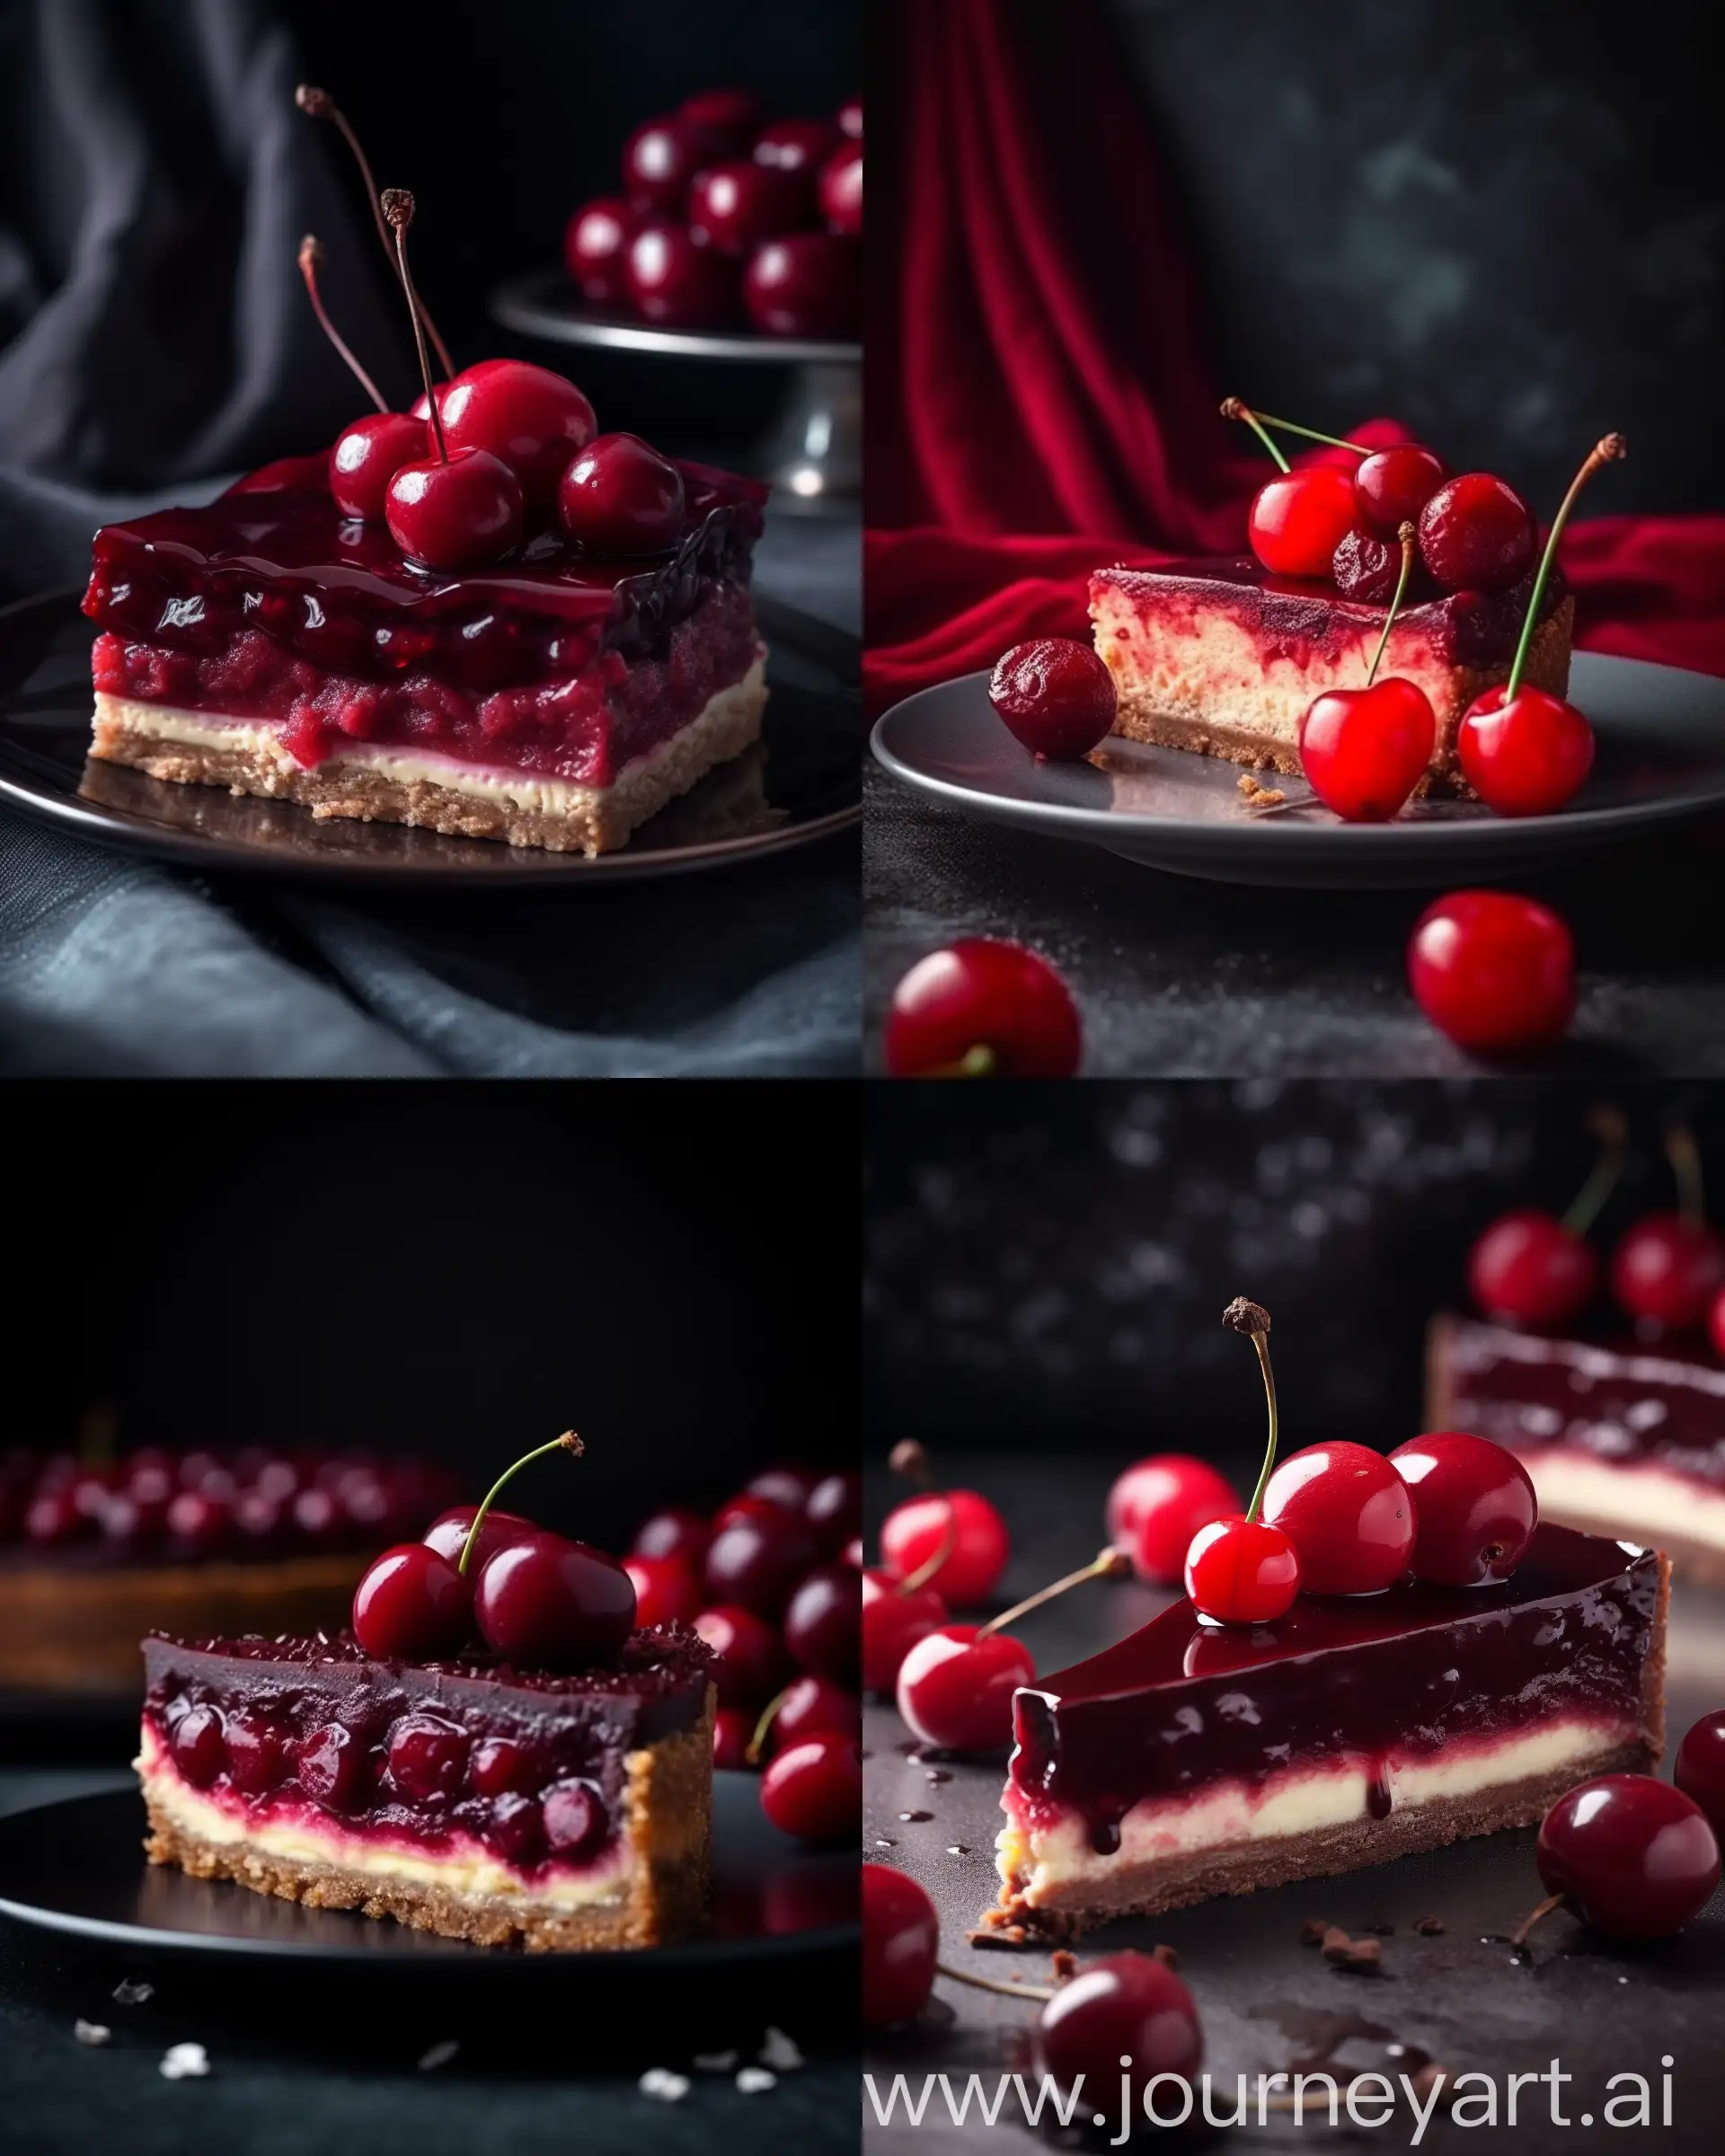 Delectable-Cherry-Cheesecake-Slice-Captivating-CloseUp-Food-Photography